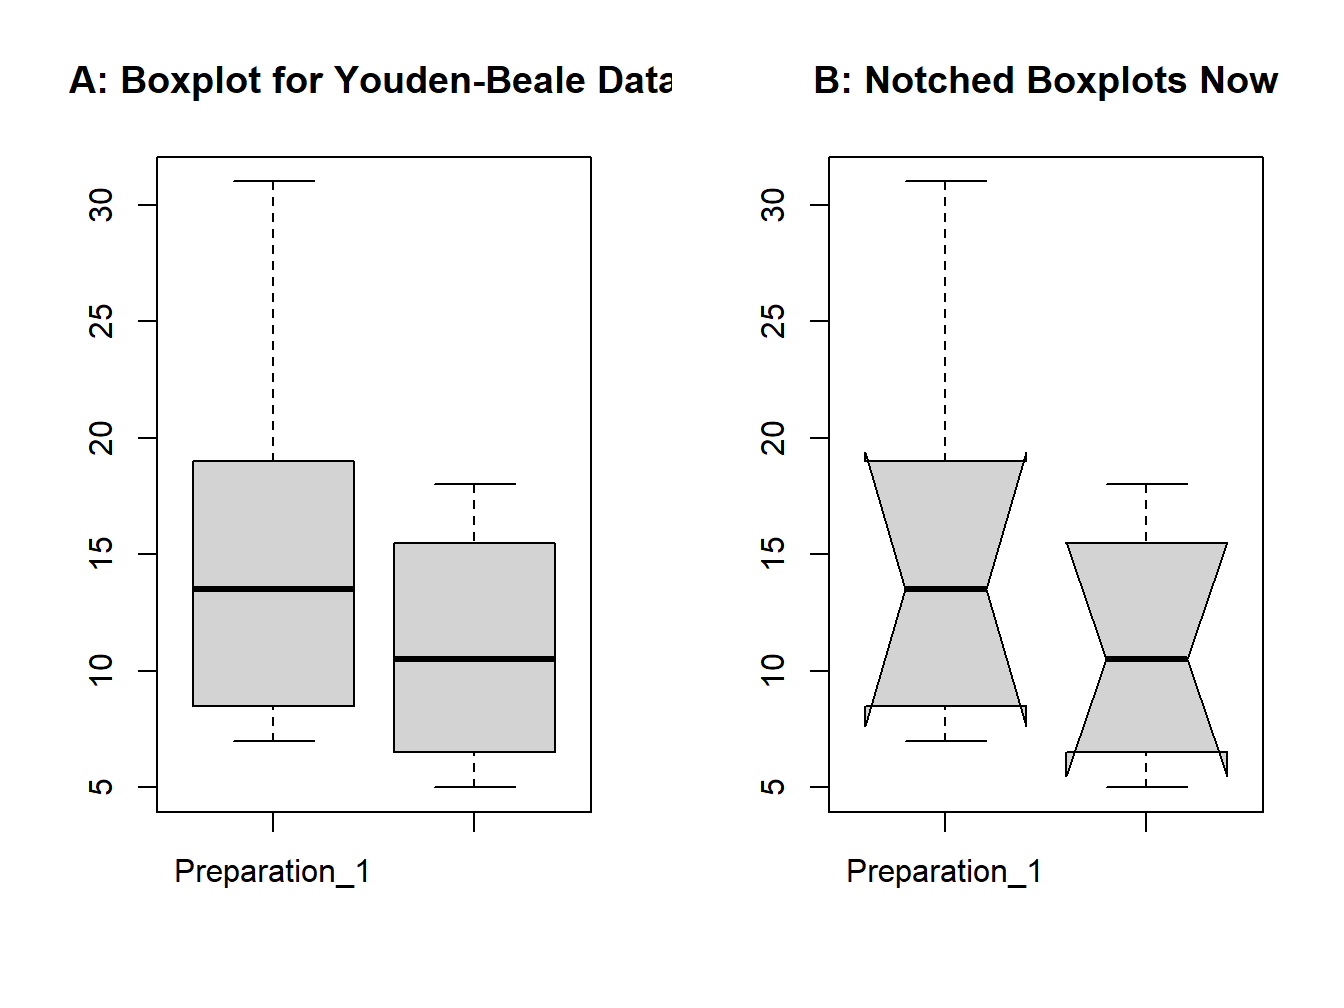 Boxplot for the Youden-Beale Experiment